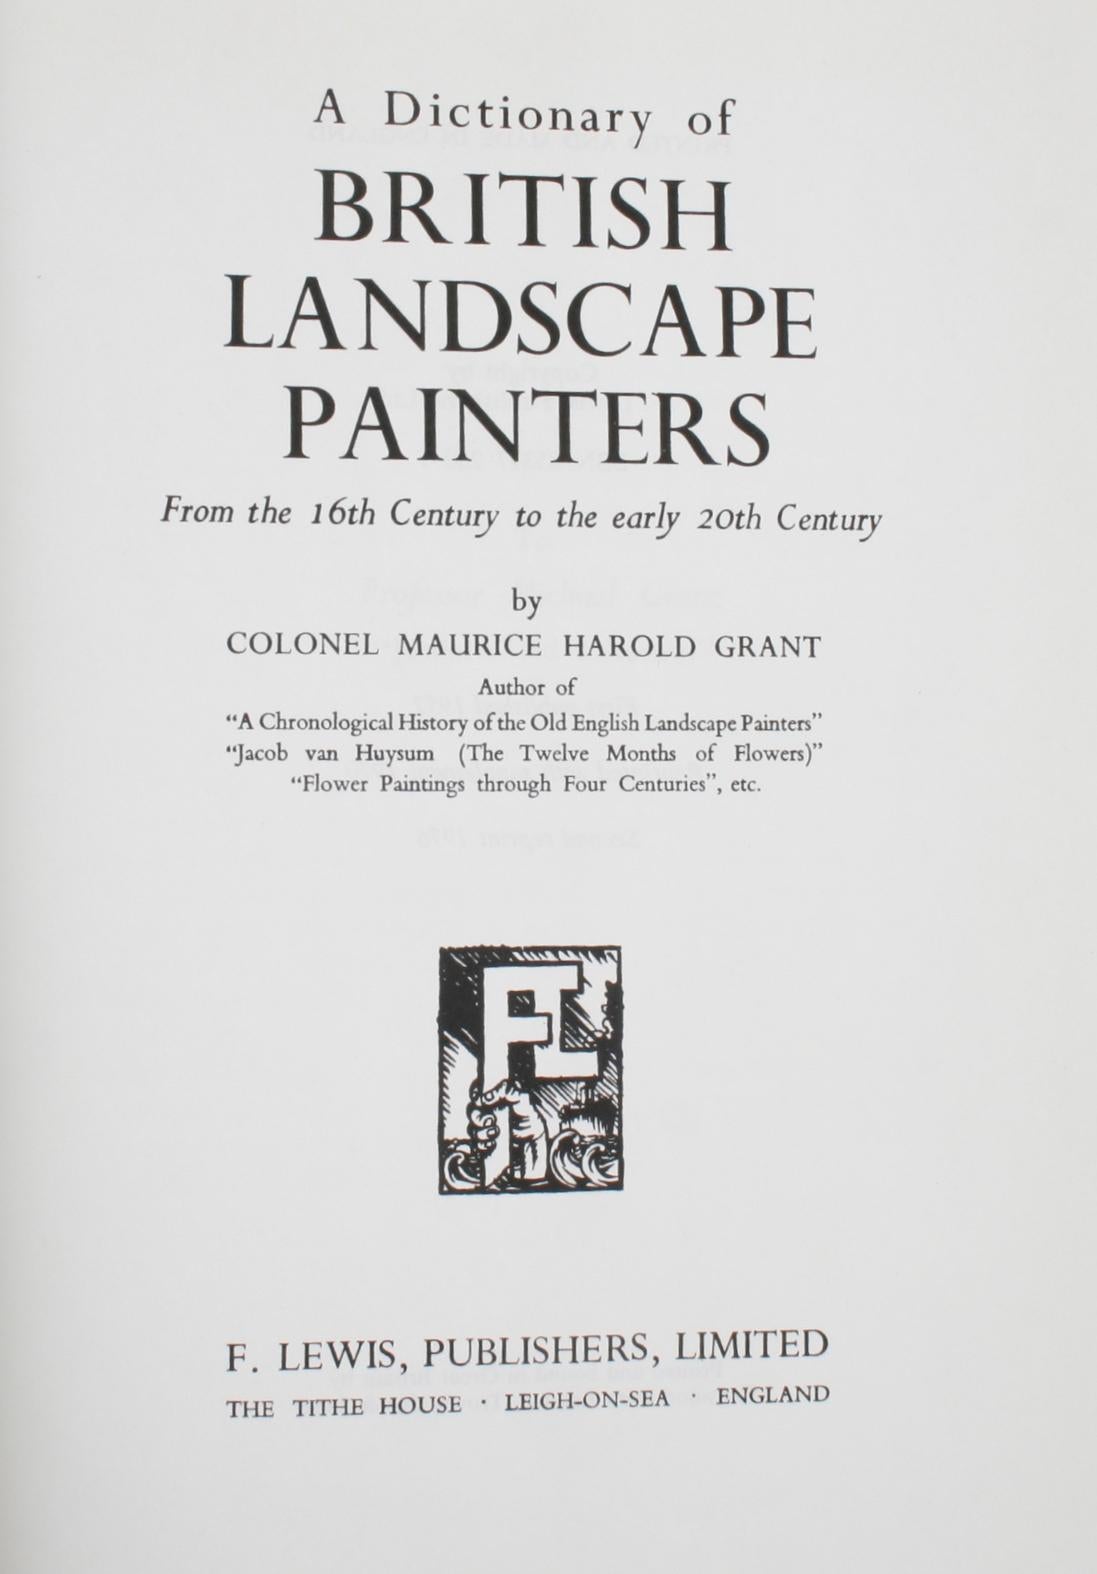 Dictionary of British landscape painters by Maurice H. Grant. Leigh-on-Sea: Lewis, UK, 1970. Re-print hardcover with dust jacket. One of the bibles of English landscape painters.
NPT Books a division of N.P. Trent Antiques has a large collection of